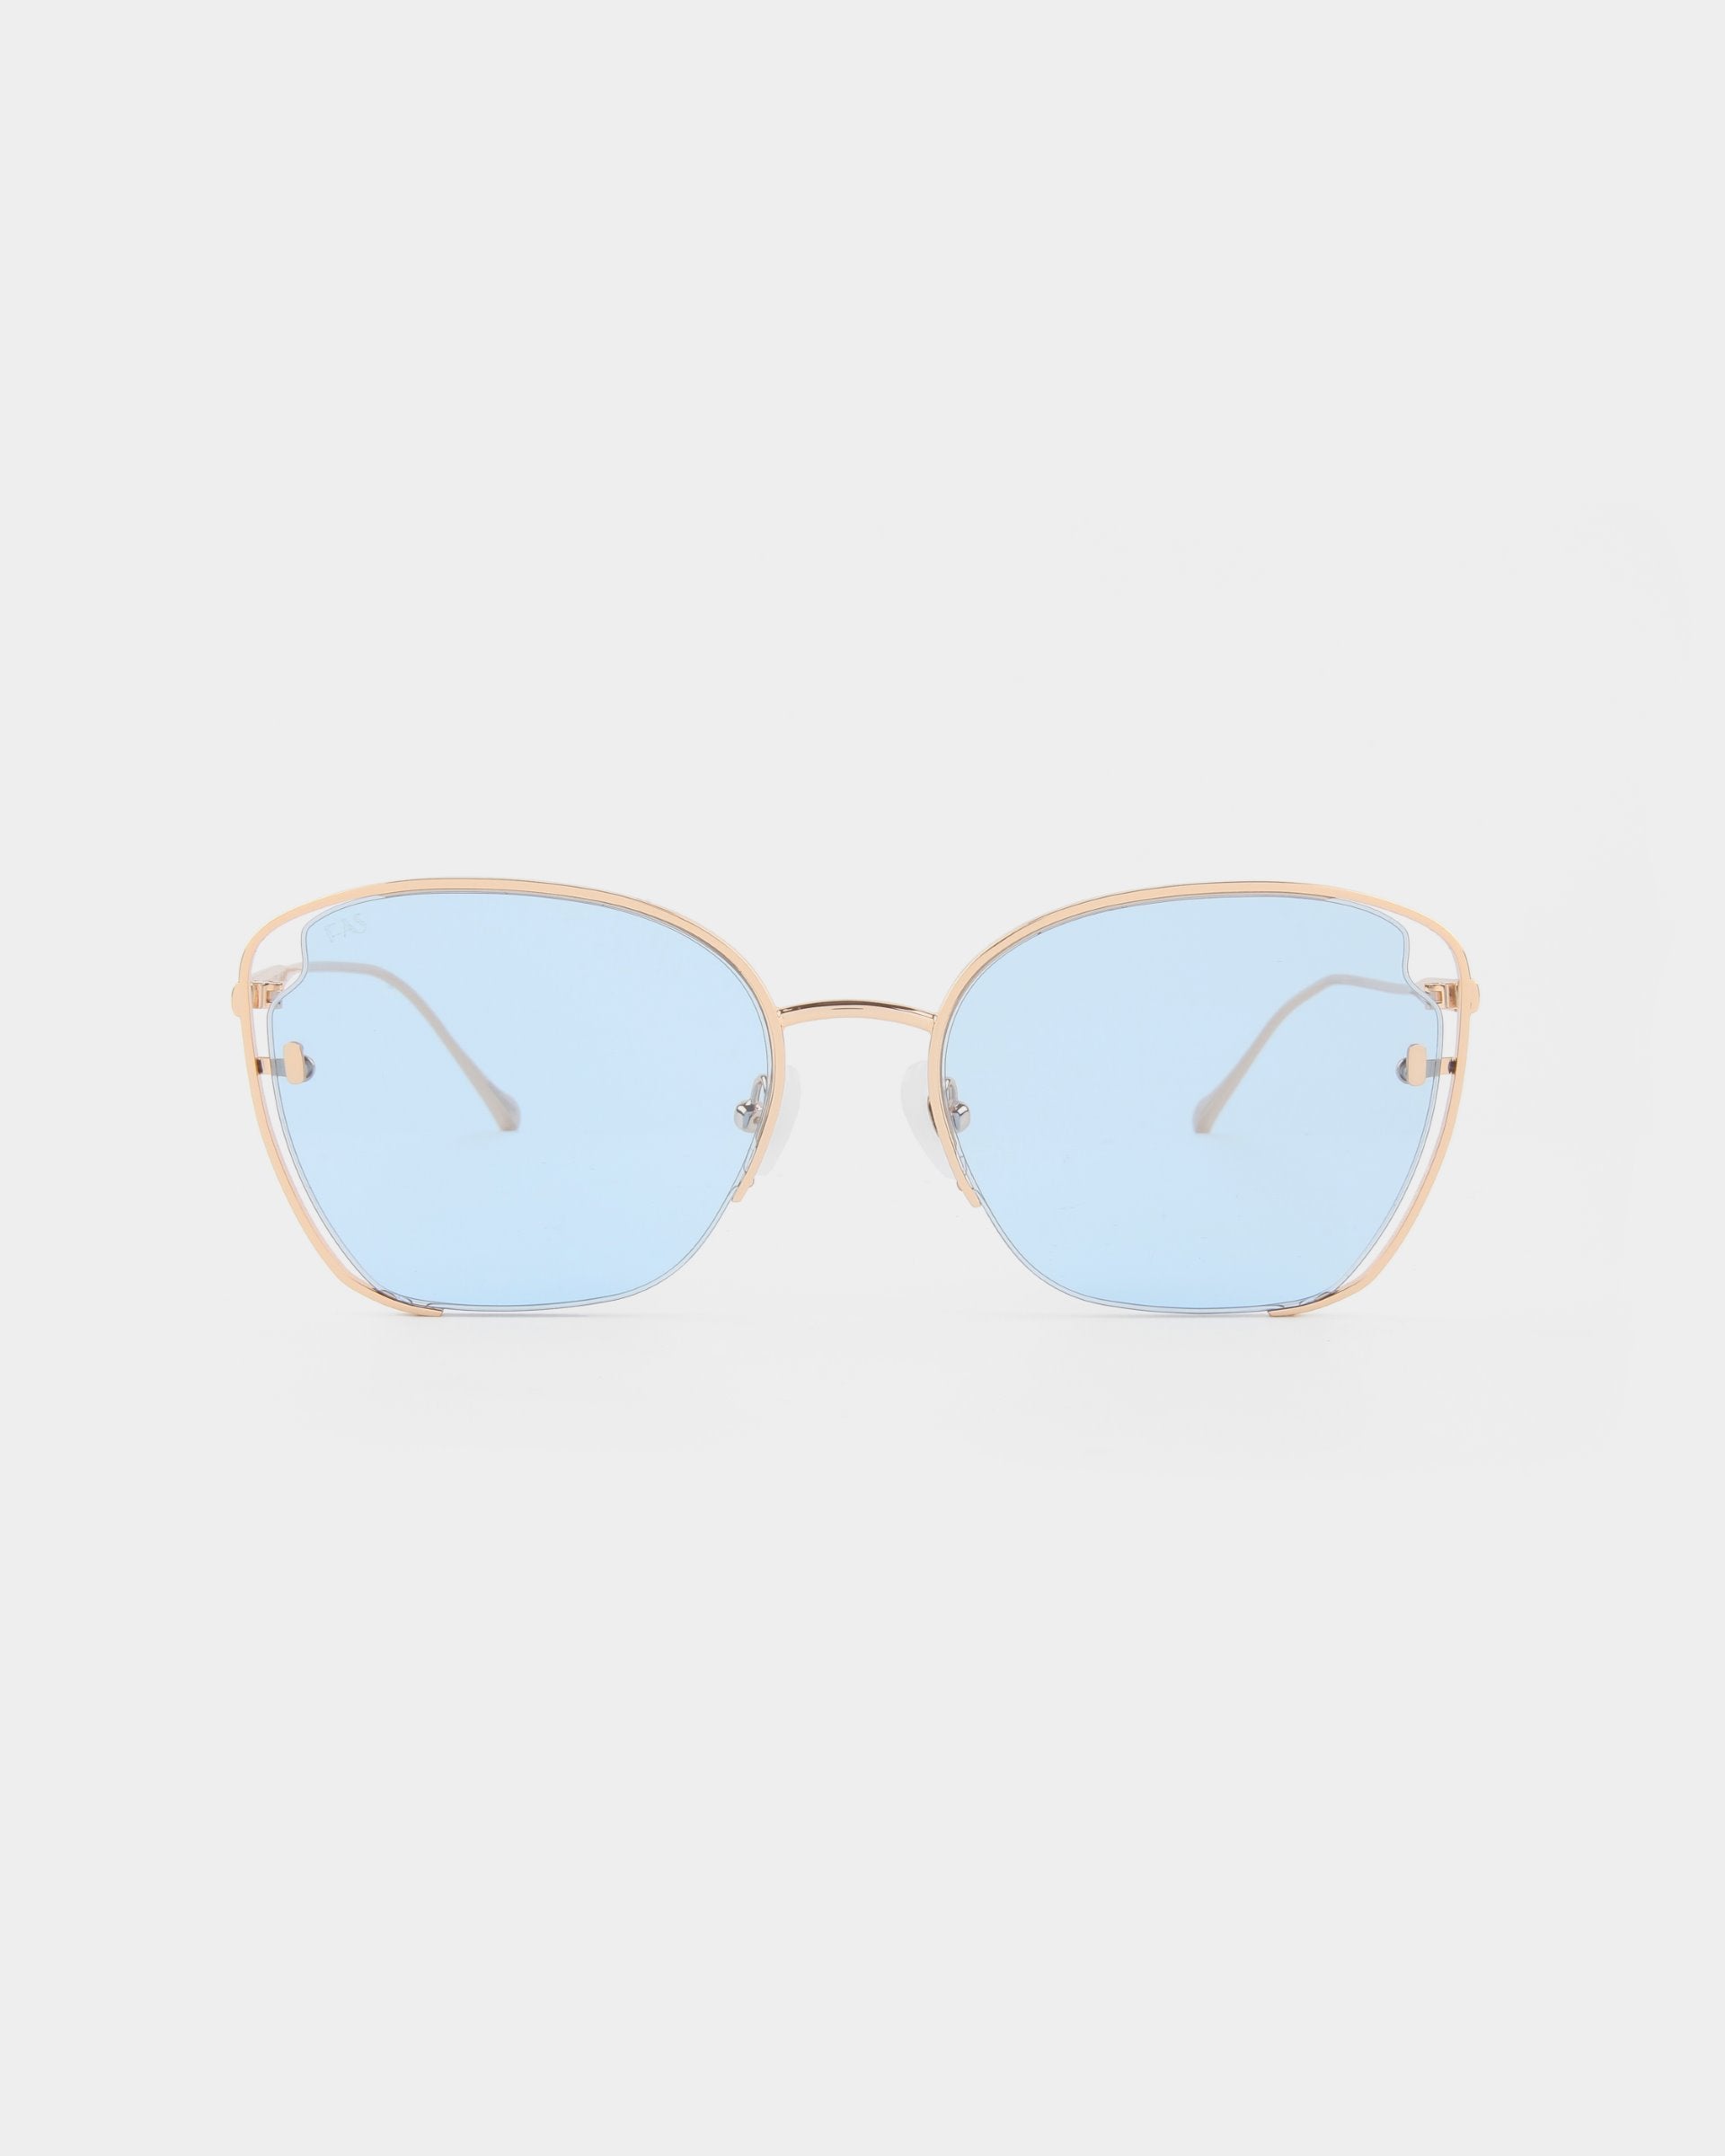 Introducing the Eden sunglasses by For Art&#39;s Sake®, a pair of stylish shades featuring 18-karat gold plated metal frames and light blue UVA &amp; UVB-protected lenses. The design sports slightly rounded square lenses, with a thin, delicate nose bridge and temples that add an elegant touch to the overall appearance.